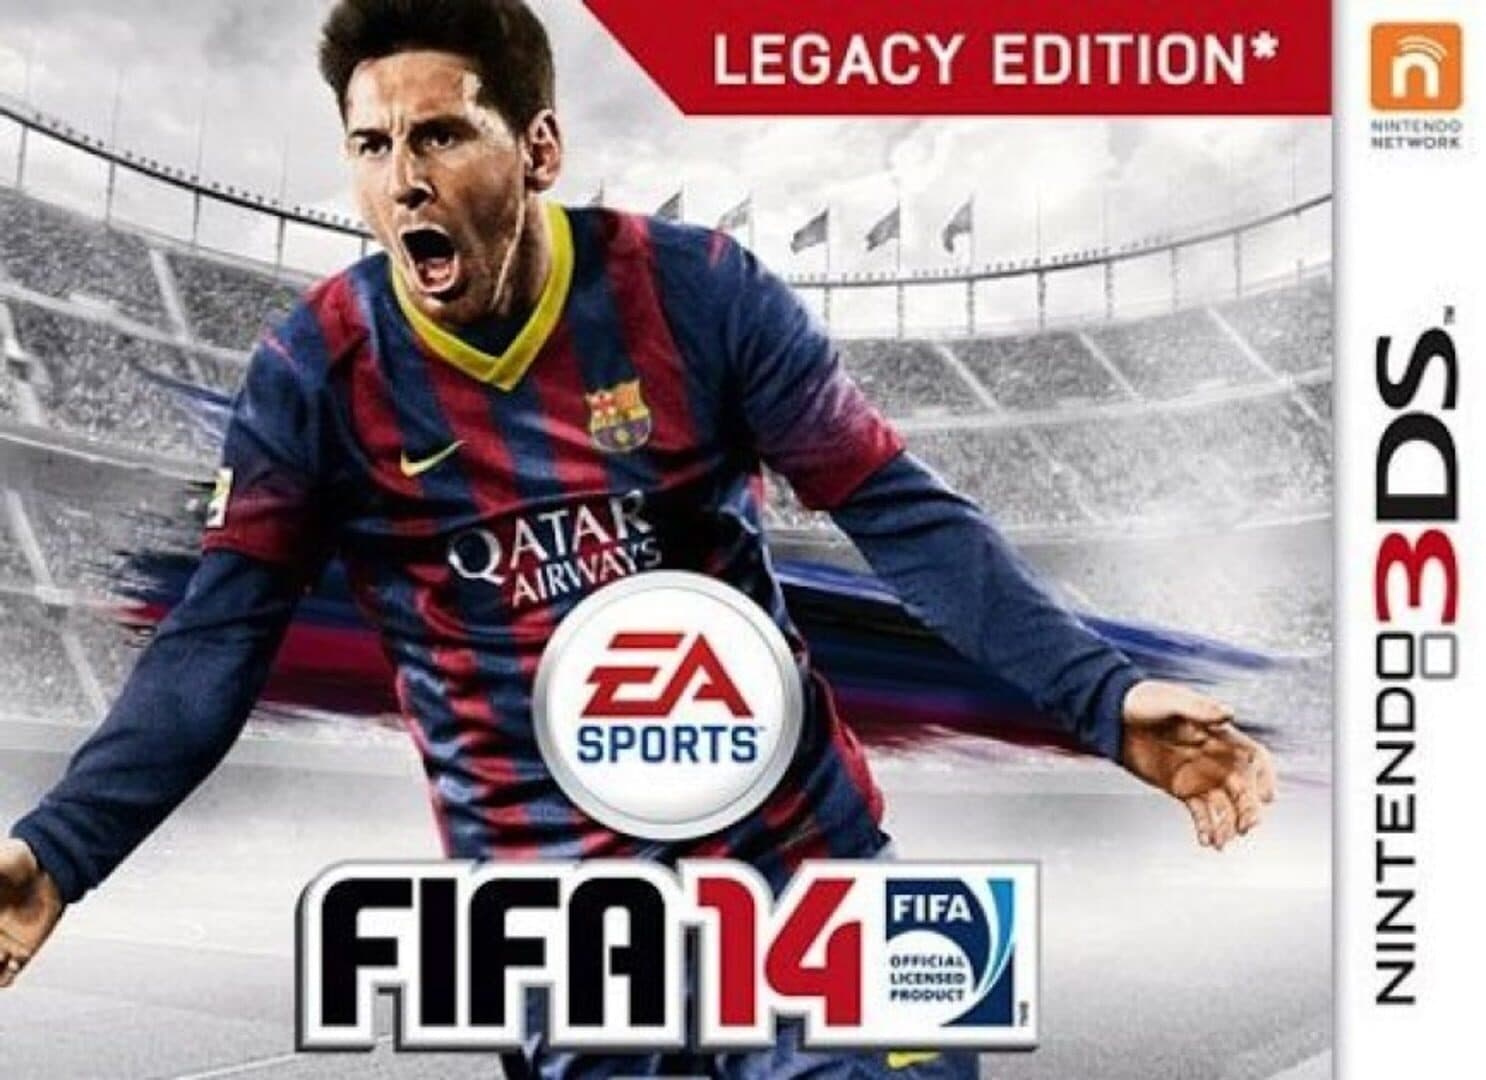 FIFA 14: Legacy Edition cover art